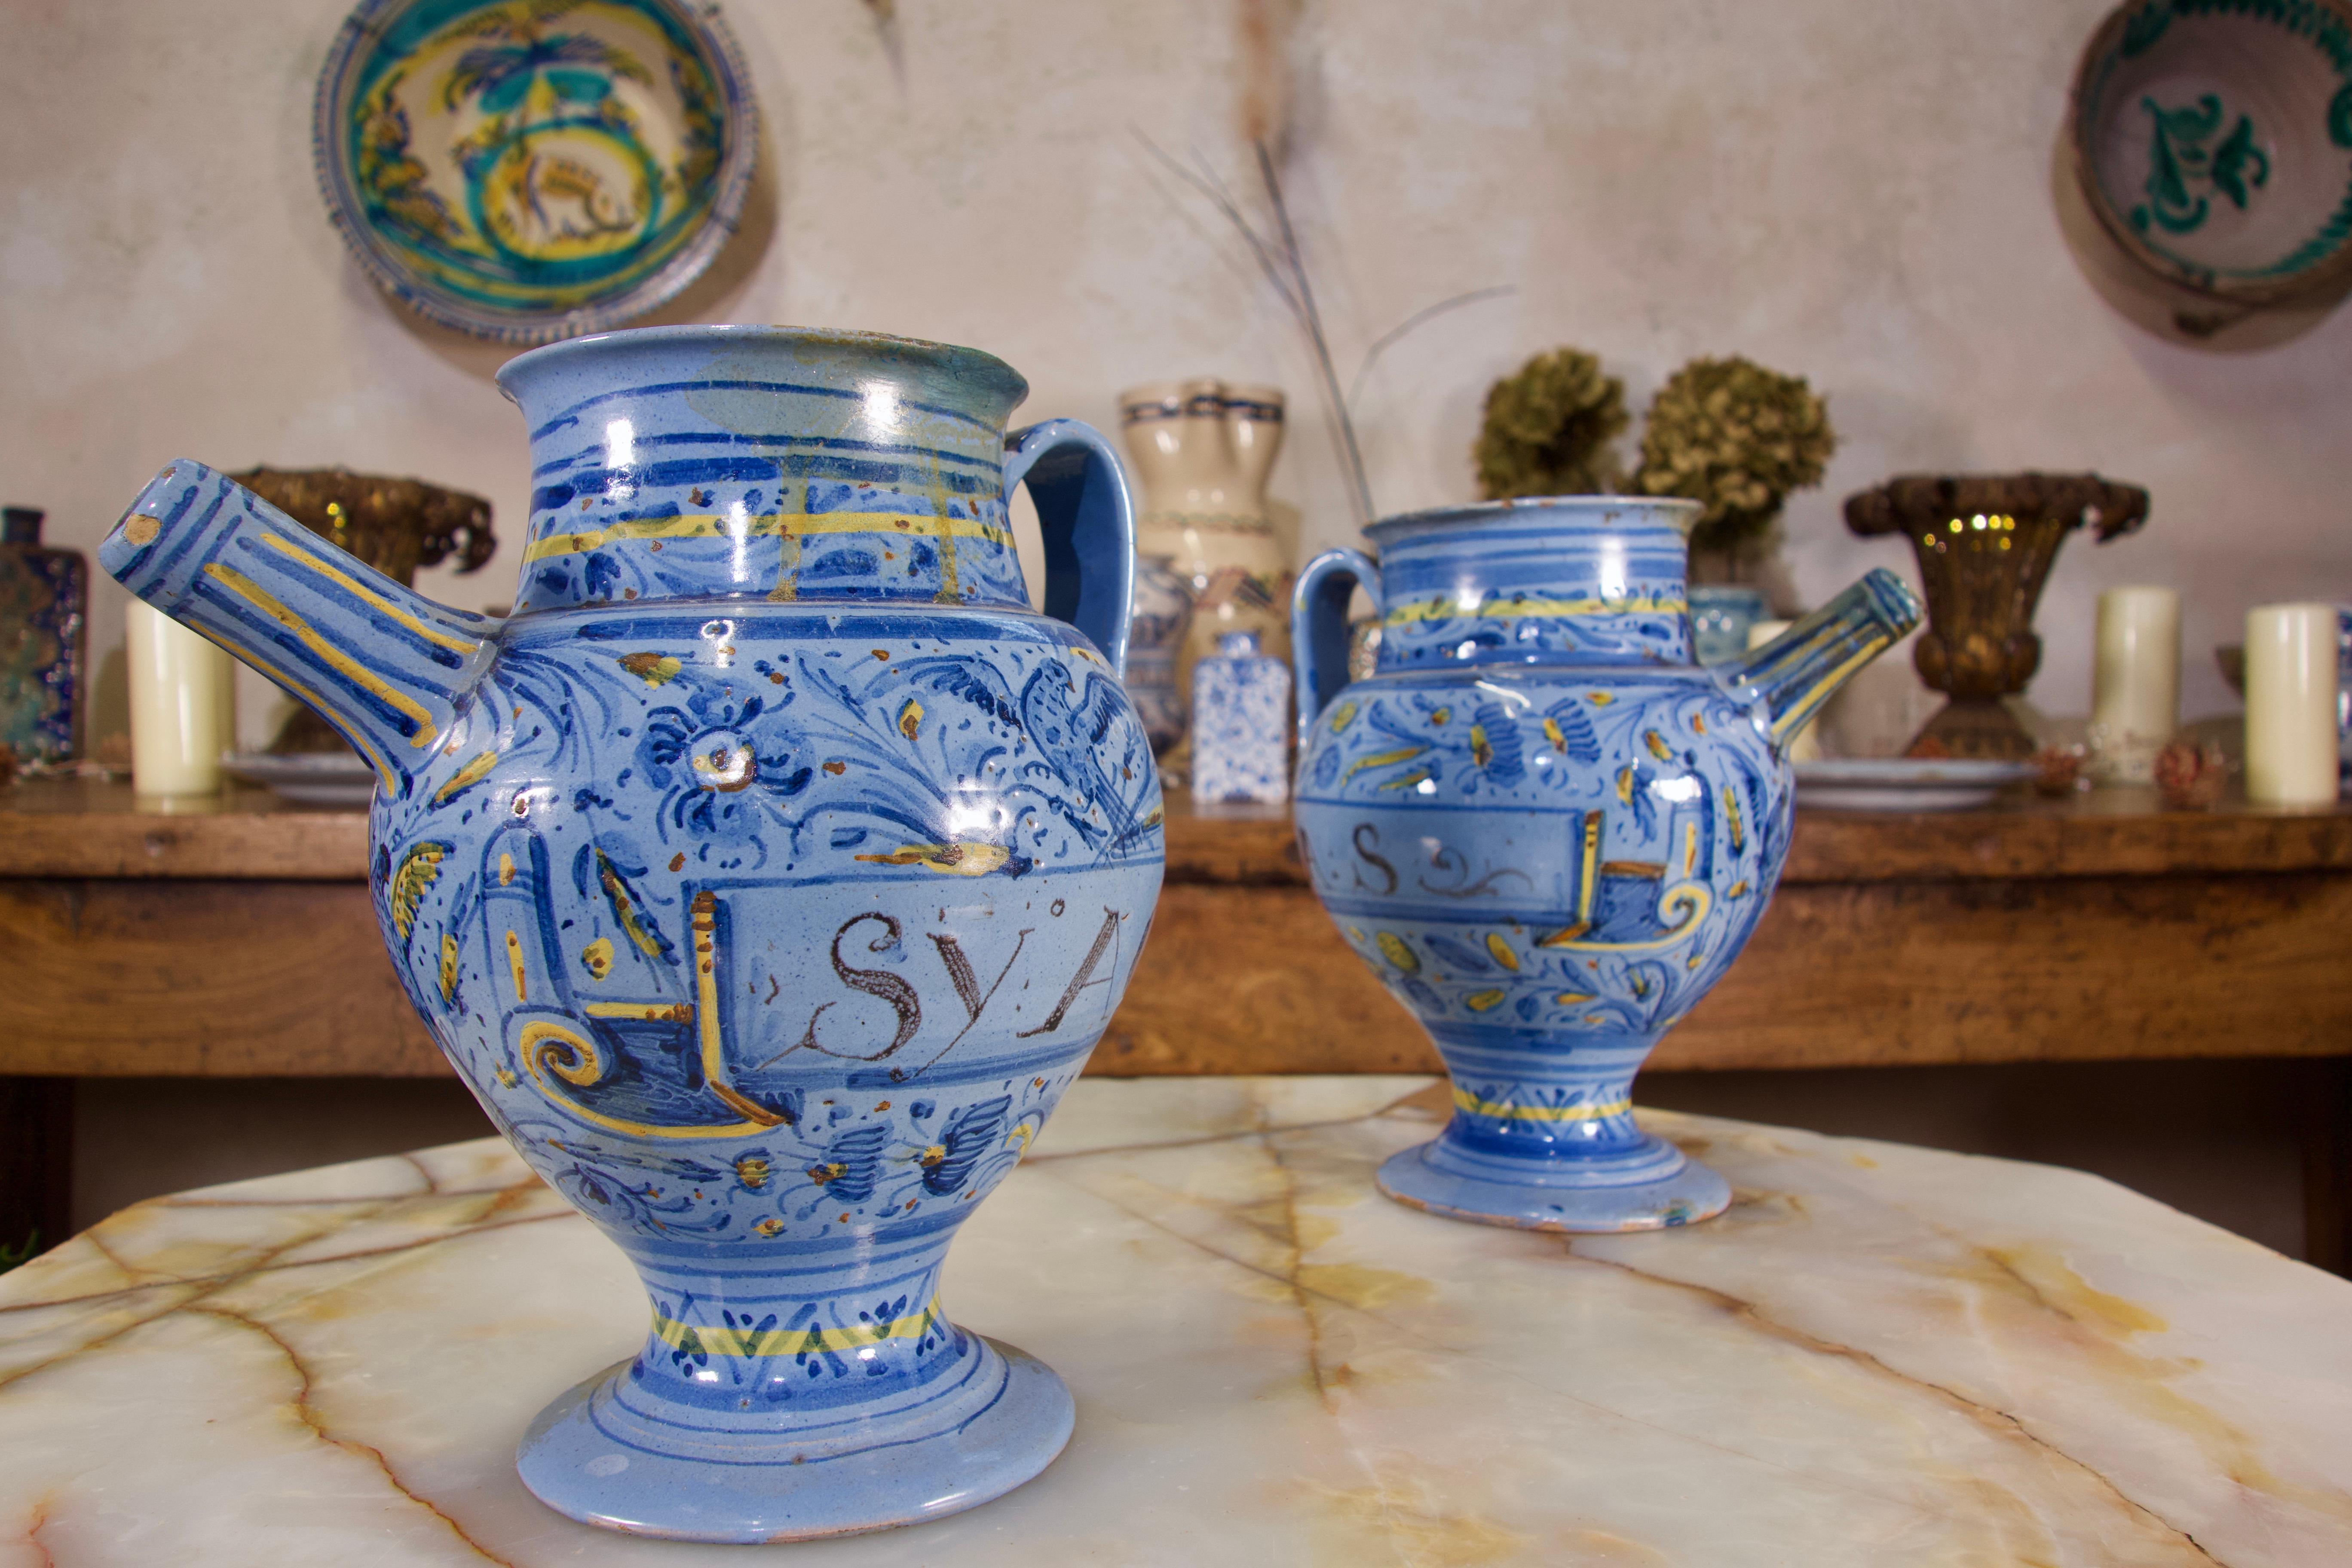 A pair of mid-17th century Italian maiolica Berettino syrup or wet drug jars. Demonstrating bulbous bodies inscribed 'MEL:ROSA:S' and 'SY:ACETOS.DIAROD' within painted labels against a ground of flowers and foliage picked out in yellow and ochre.